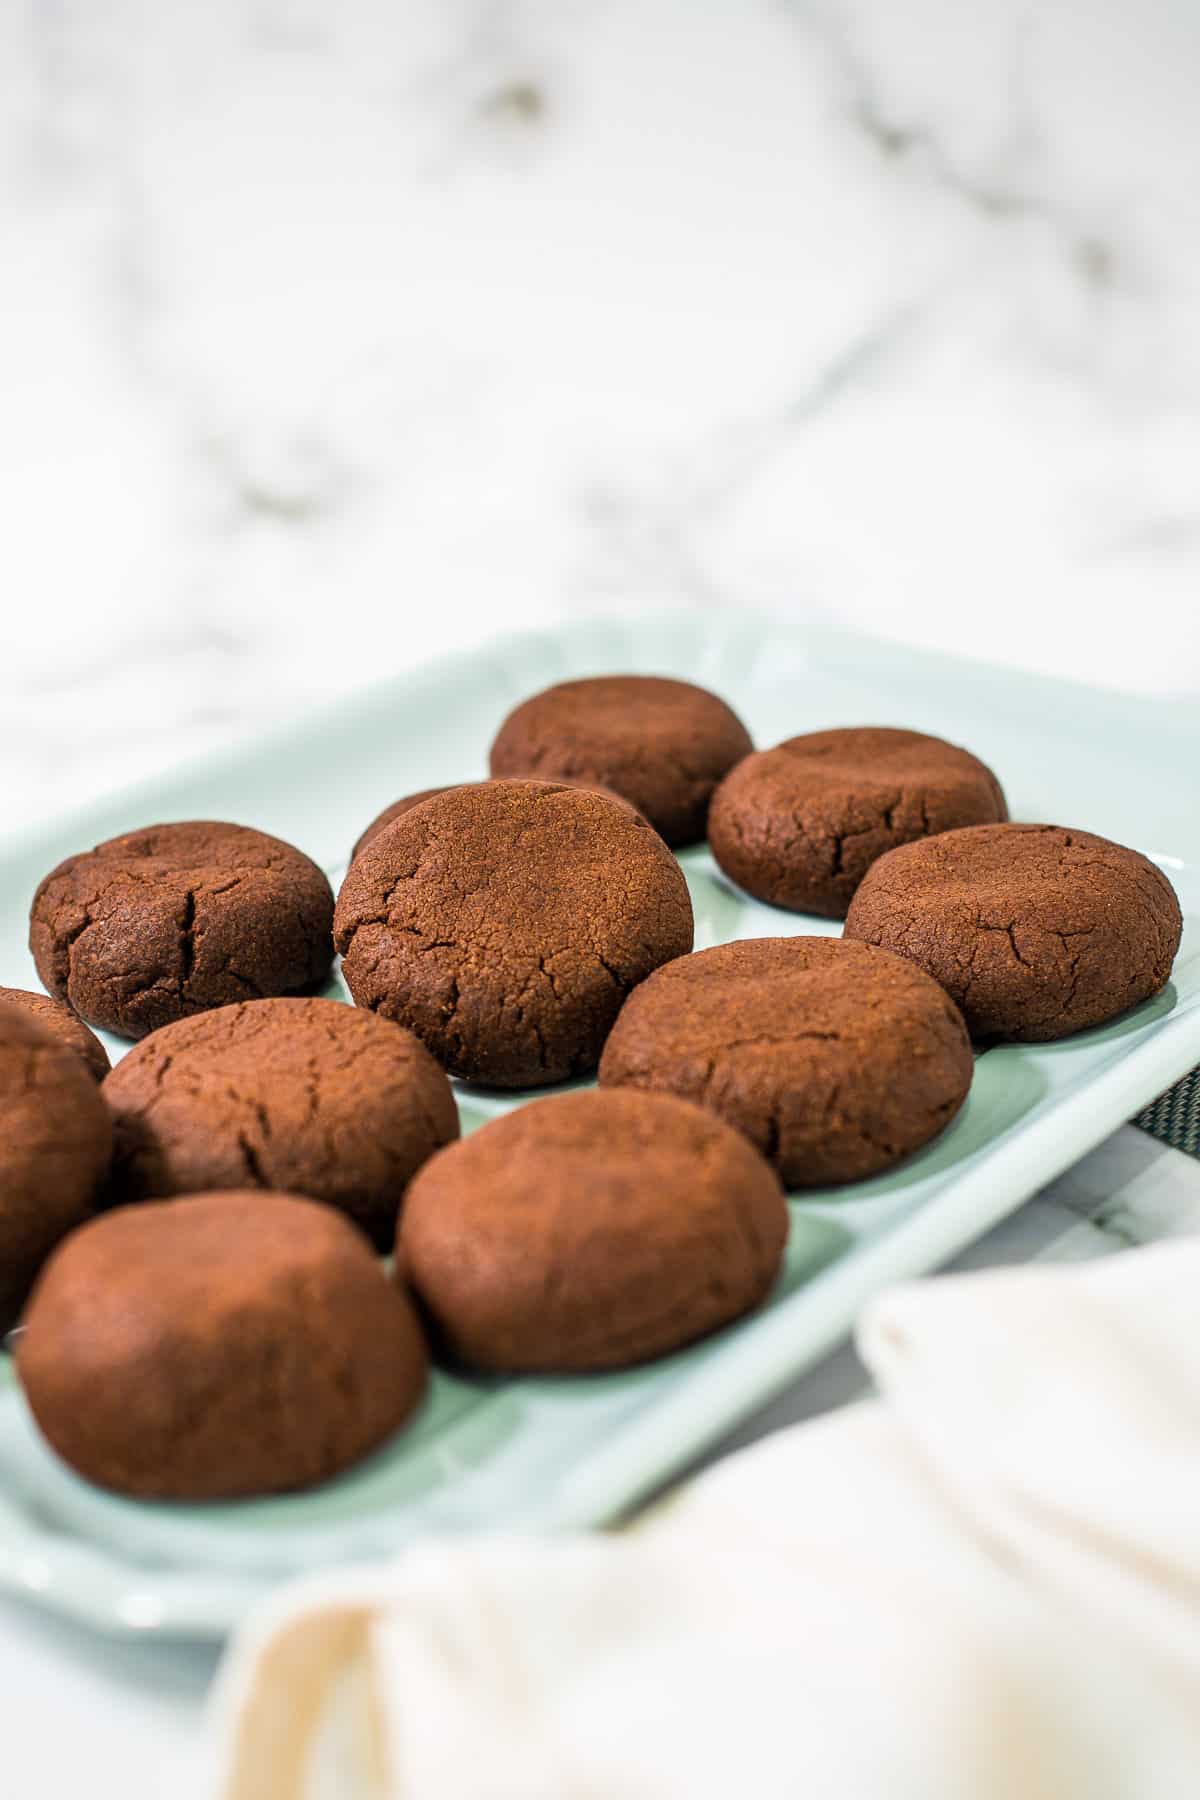 A green tray of round chocolate cookies.